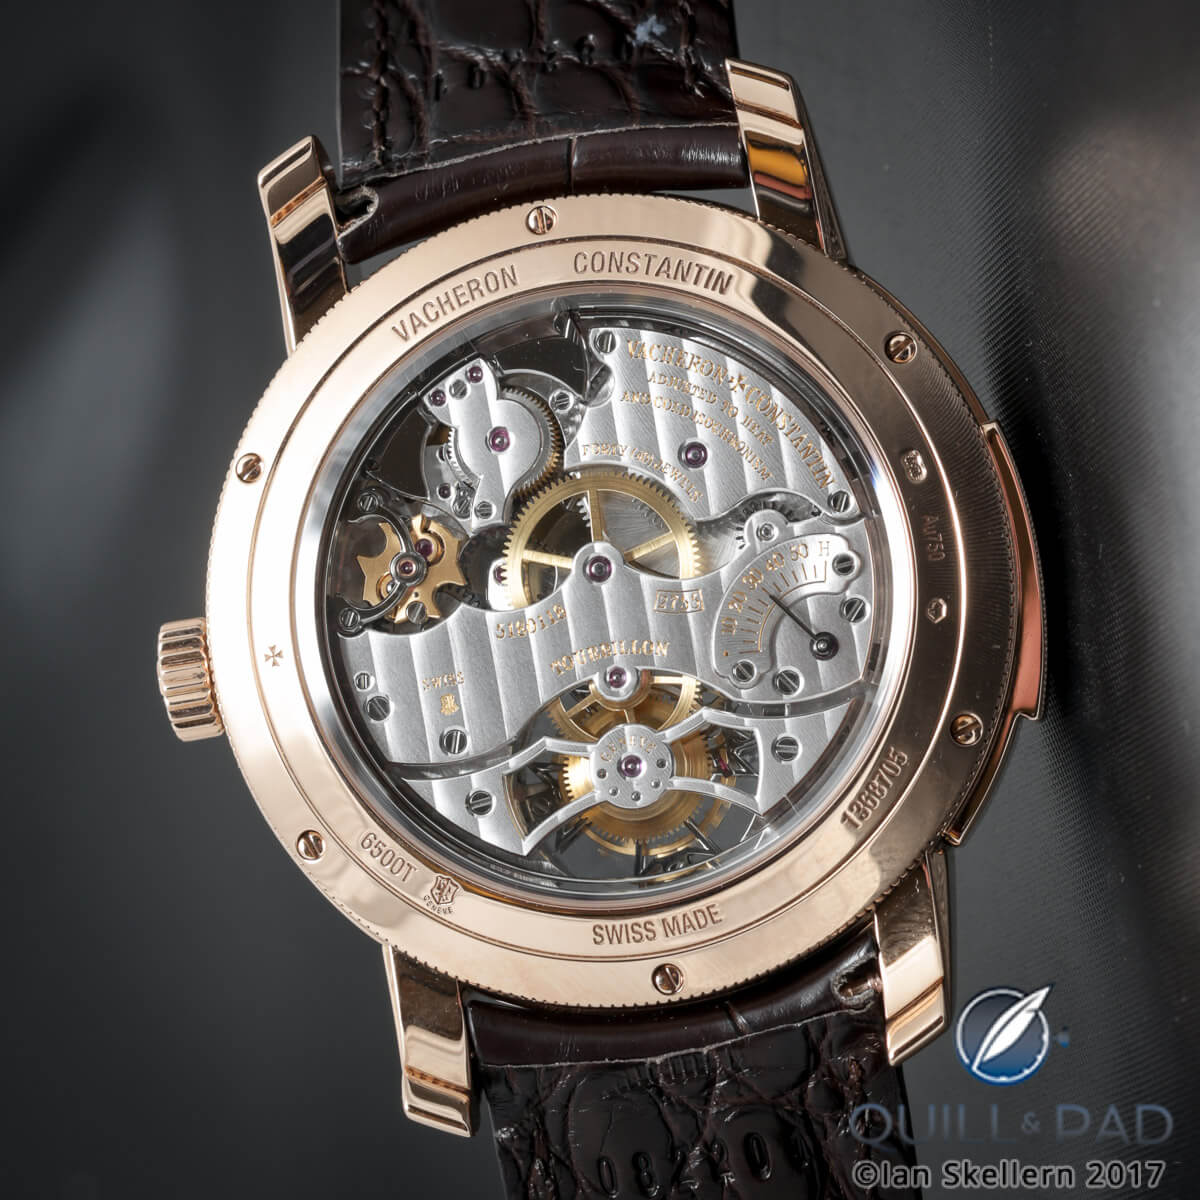 The Geneva Seal is visible on the left of the movement of this Vacheron Constantin Traditionnelle Minute Repeater Tourbillon